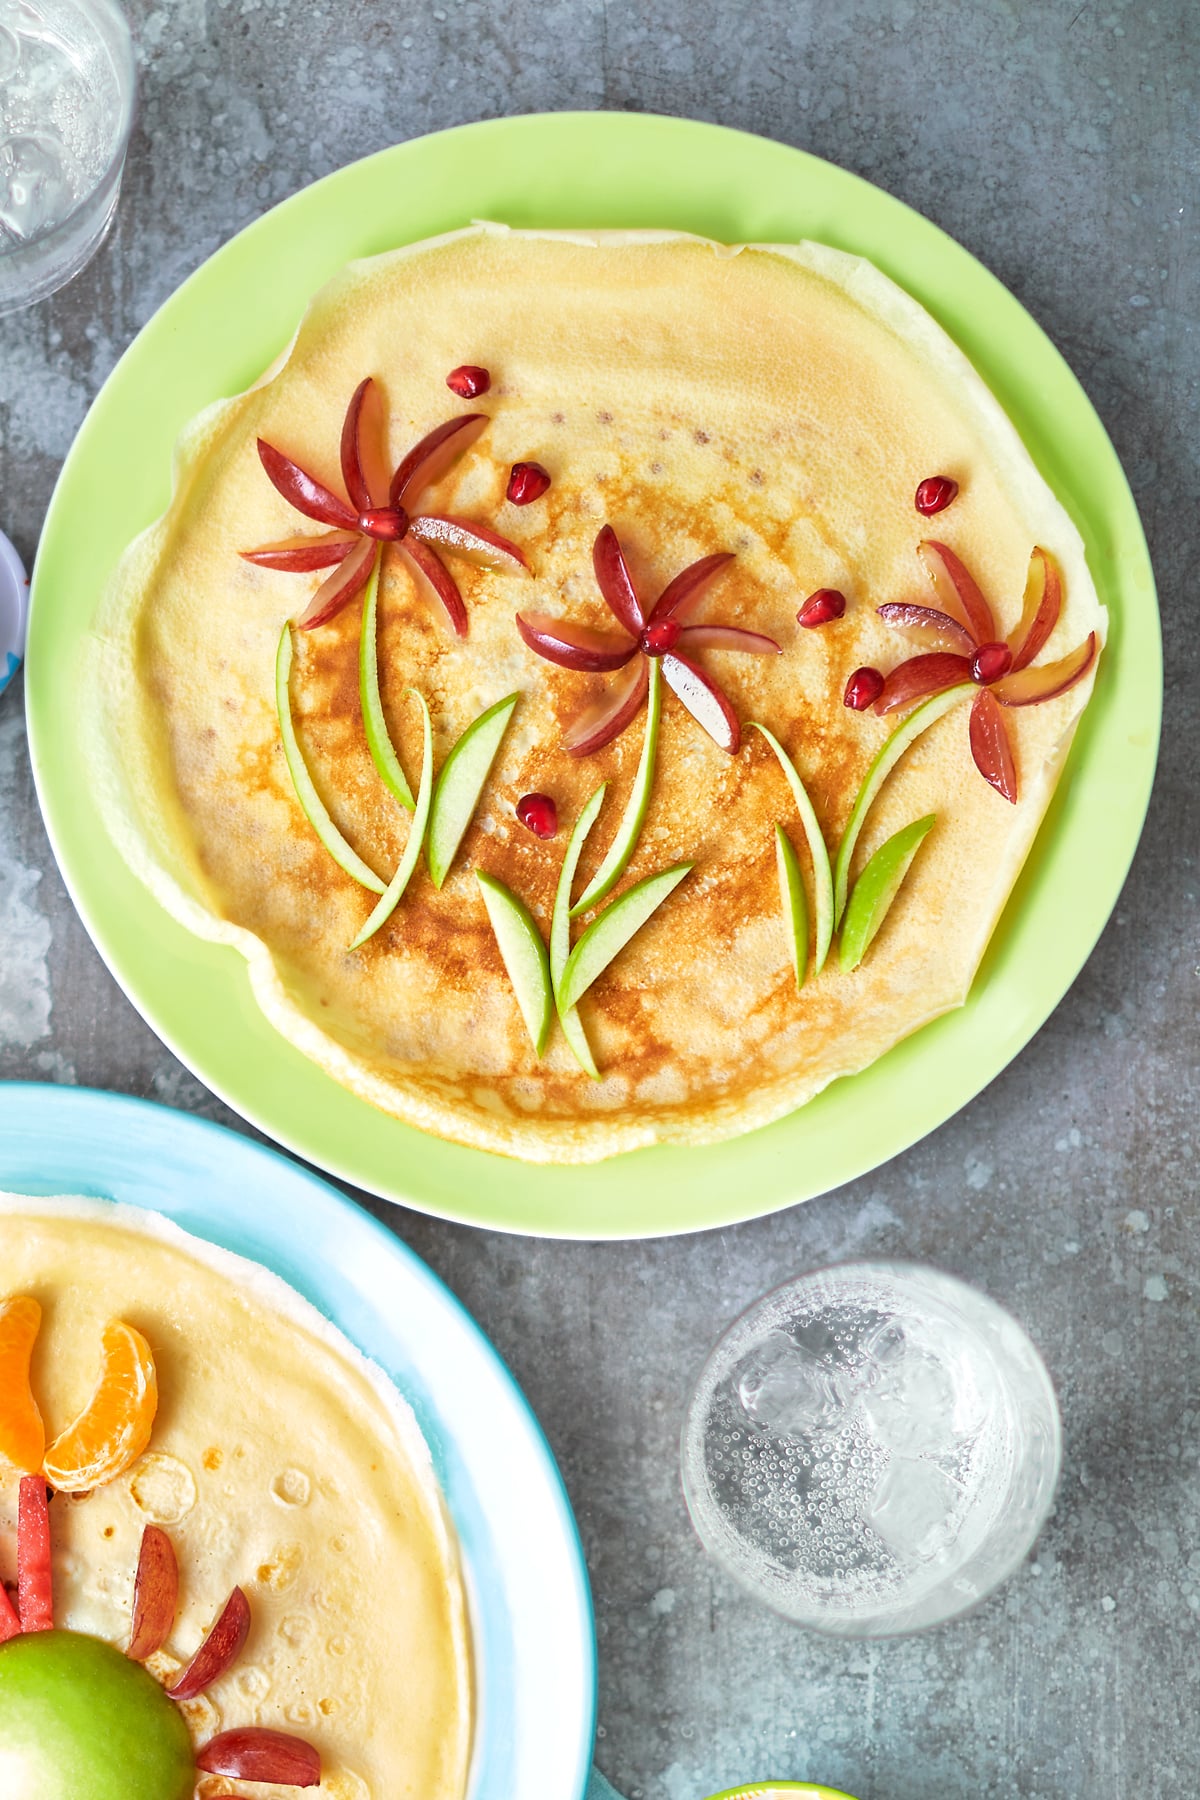 A crepe-style pancake on a green plate is decorated with fruit to resemble flowers.